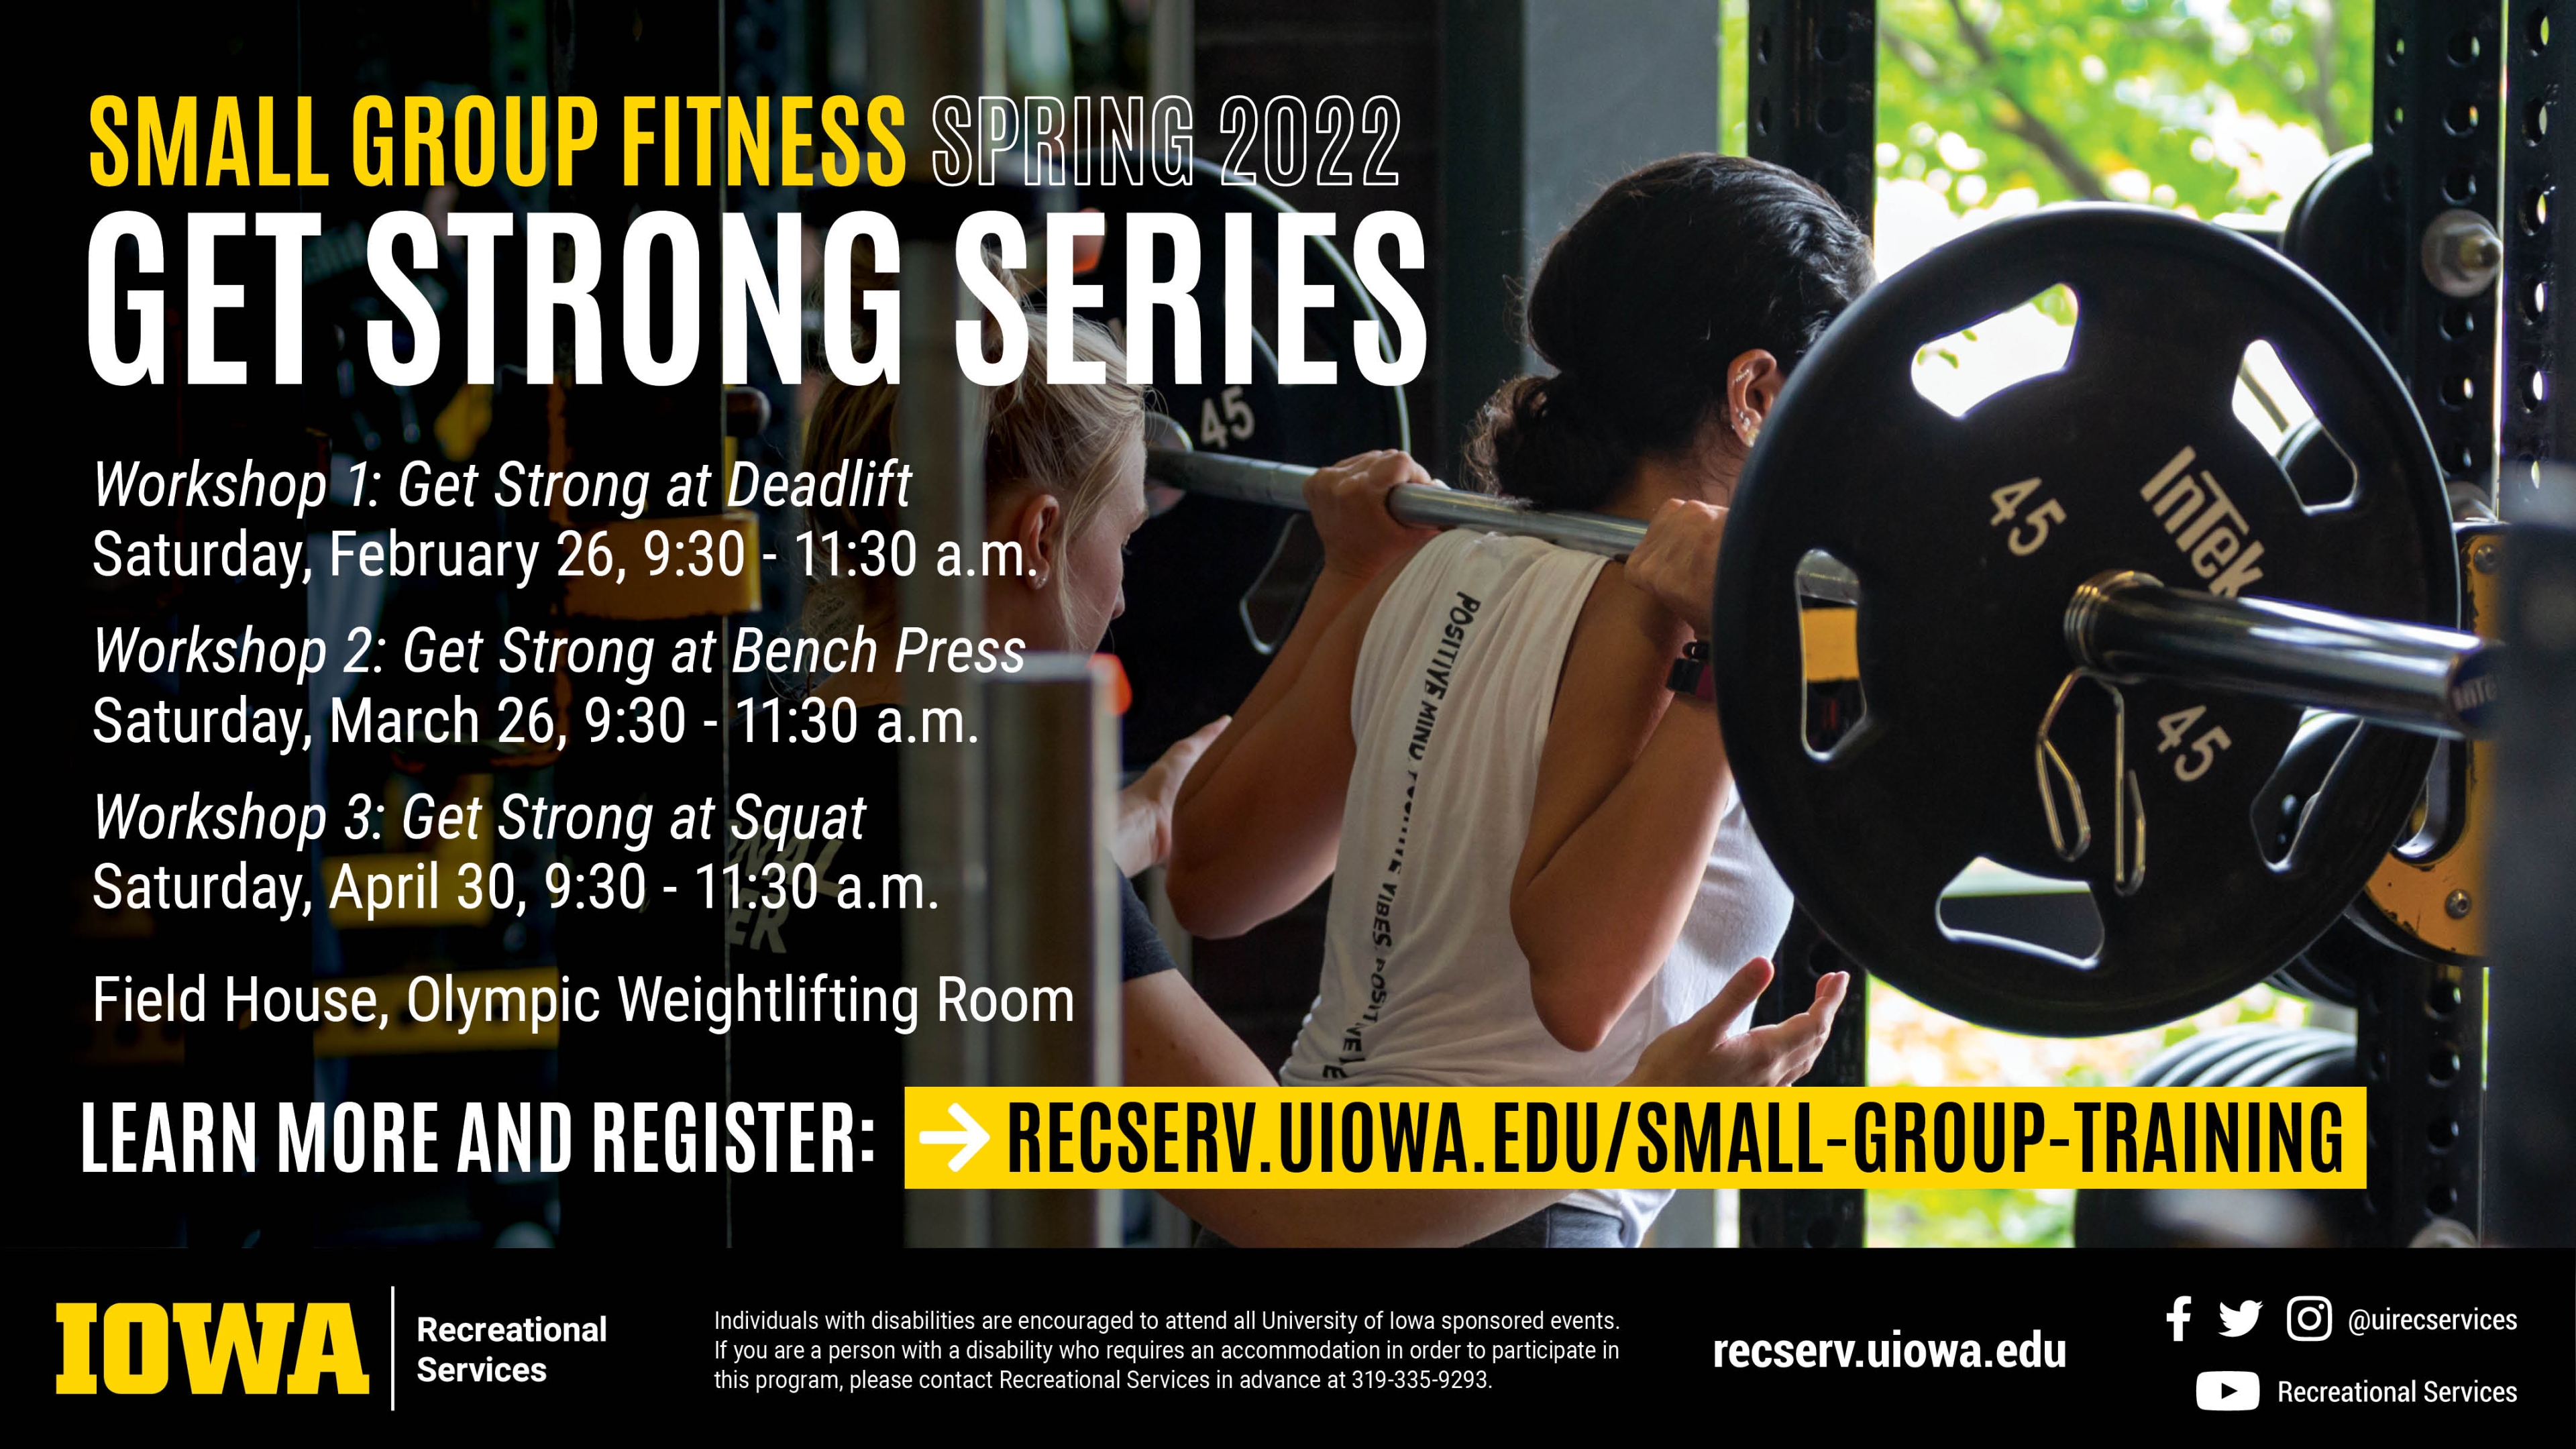 Small Group Fitness Spring 2022 Get Strong Series Workshop 1: Get Strong at Deadlift: Saturday, February 26 | 9:30 - 11:30 a.m. Workshop 2: Get Strong at Bench Press, Saturday, March 26 | 9:30 - 11:30 a.m. Workshop 3: Get Strong at Squat. Saturday, April 30 | 9:30 - 11:30 a.m. Field House, Olympic Weightlifting Room. Learn more and register: recserv.uiowa.edu/small-group-training